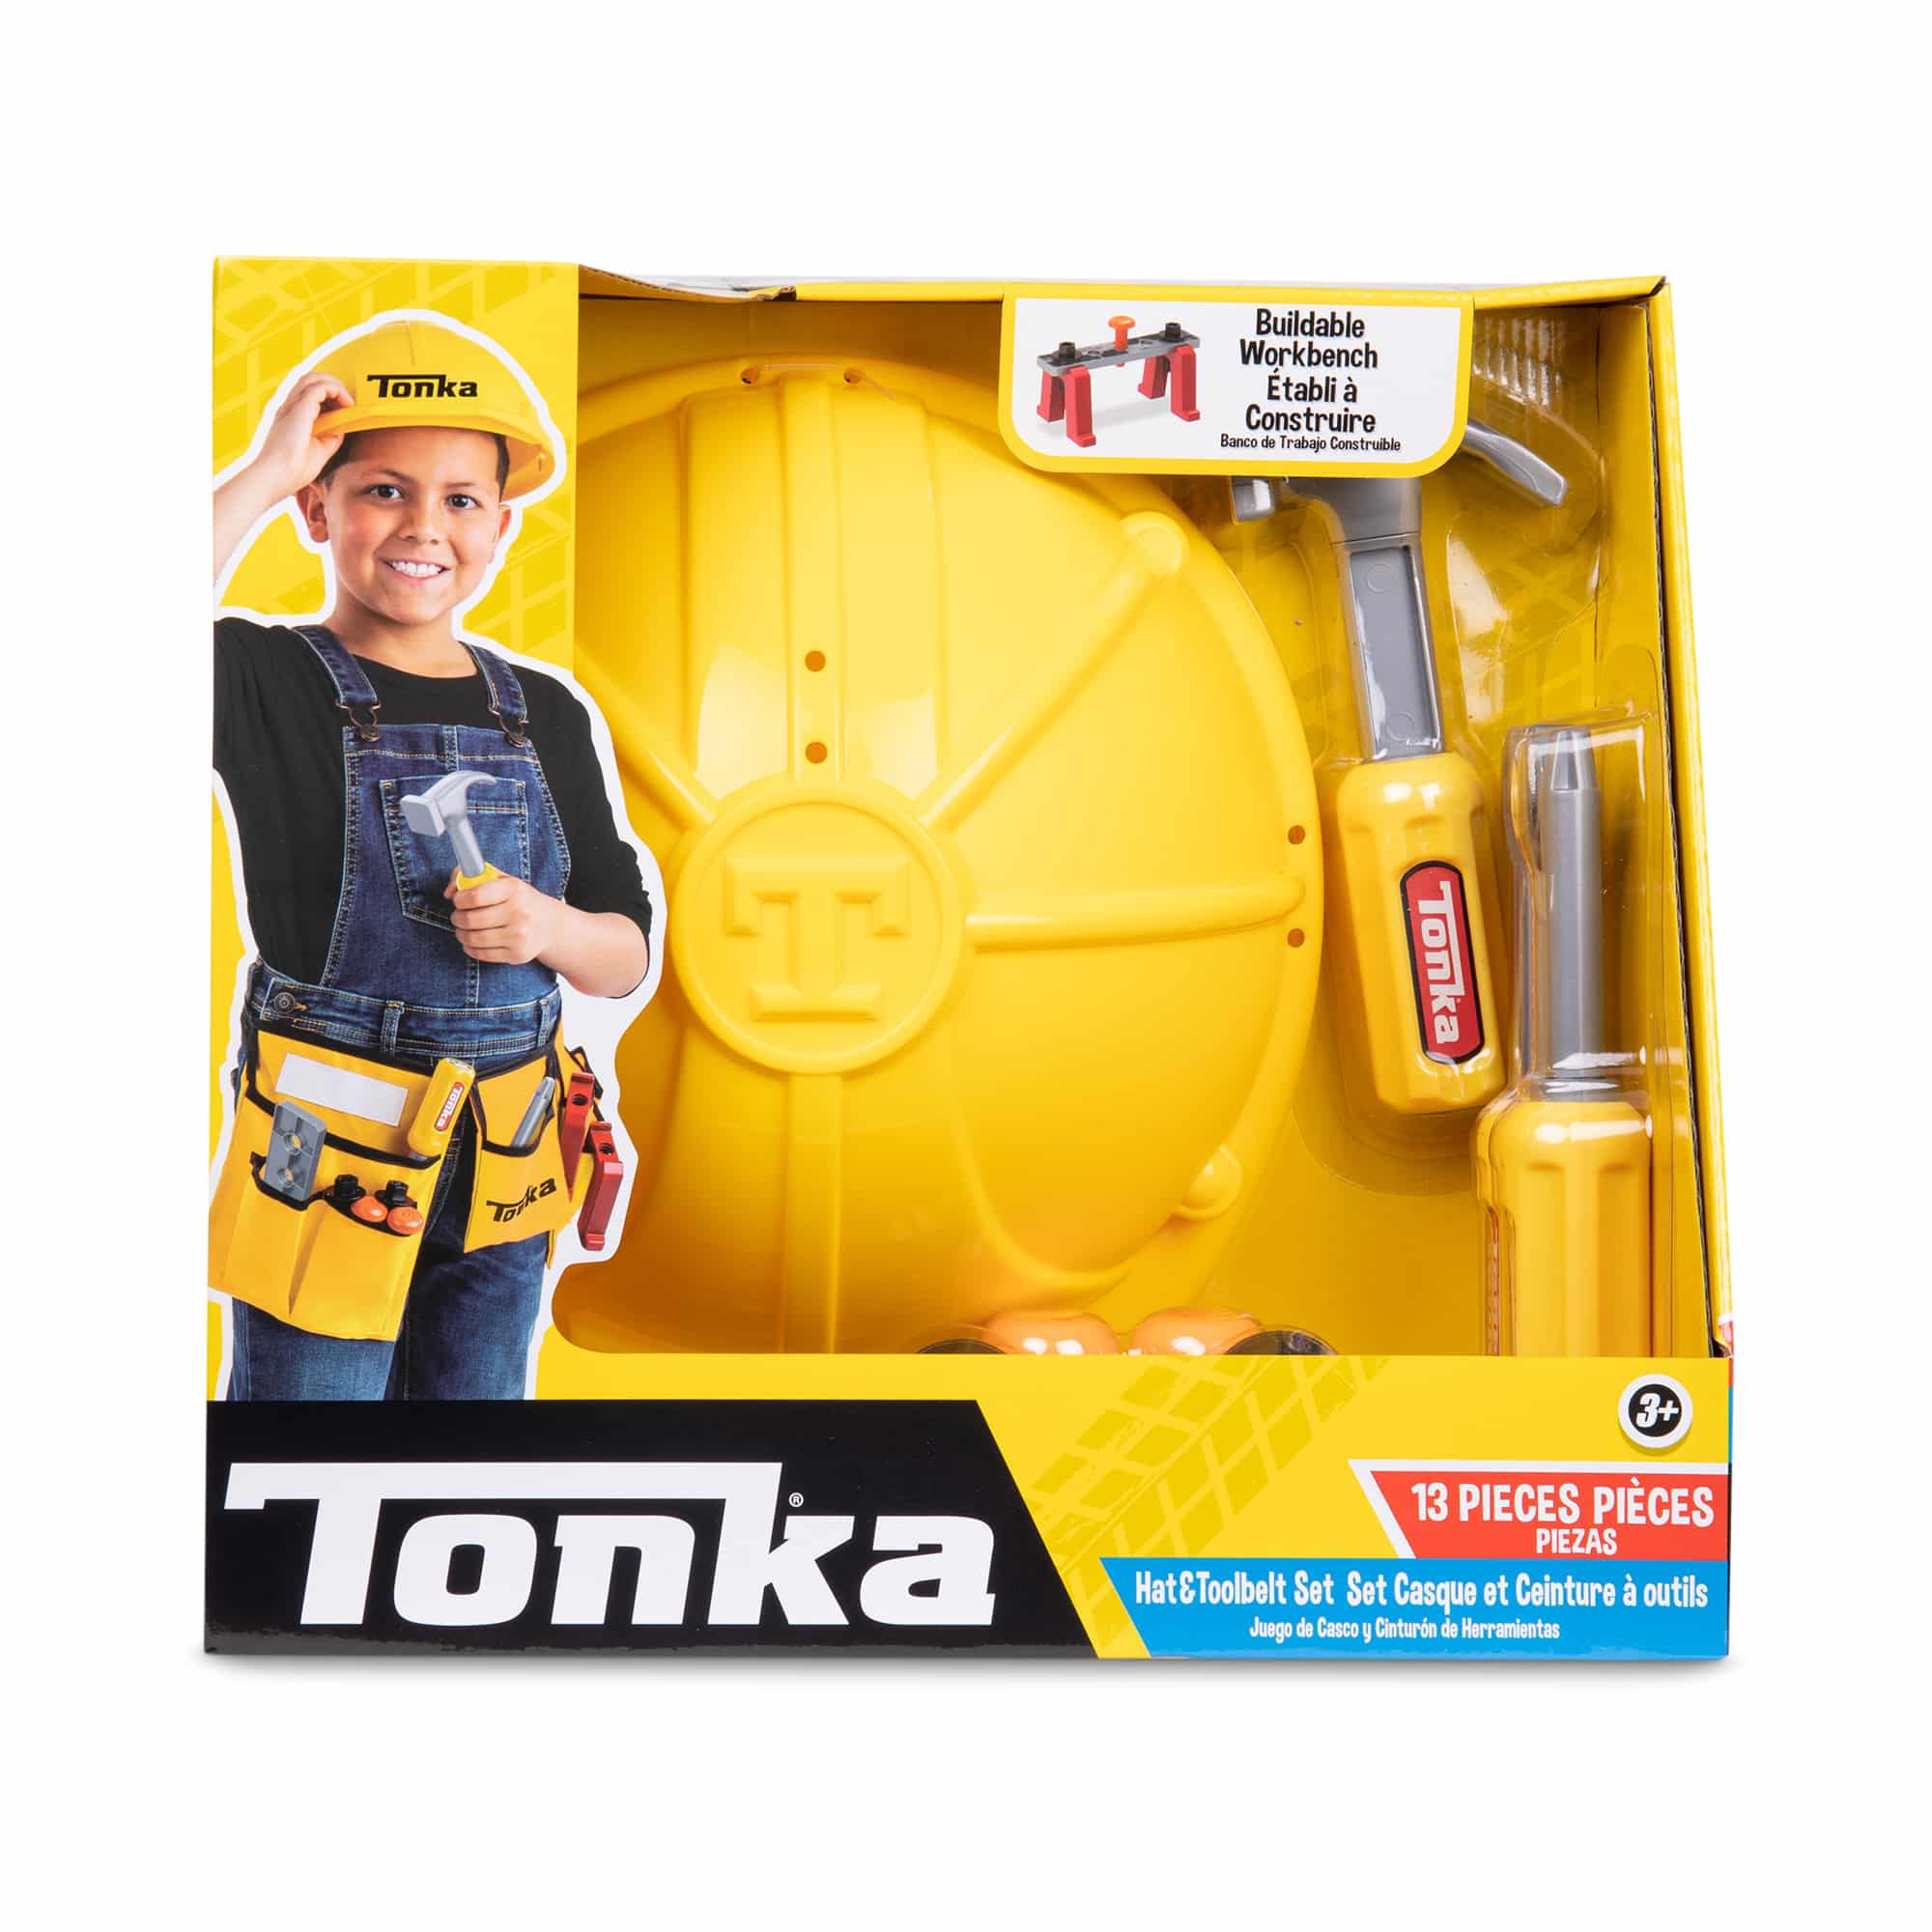 Front view of the Tonka Tough Tool Belt & Hat Set in its packaging.